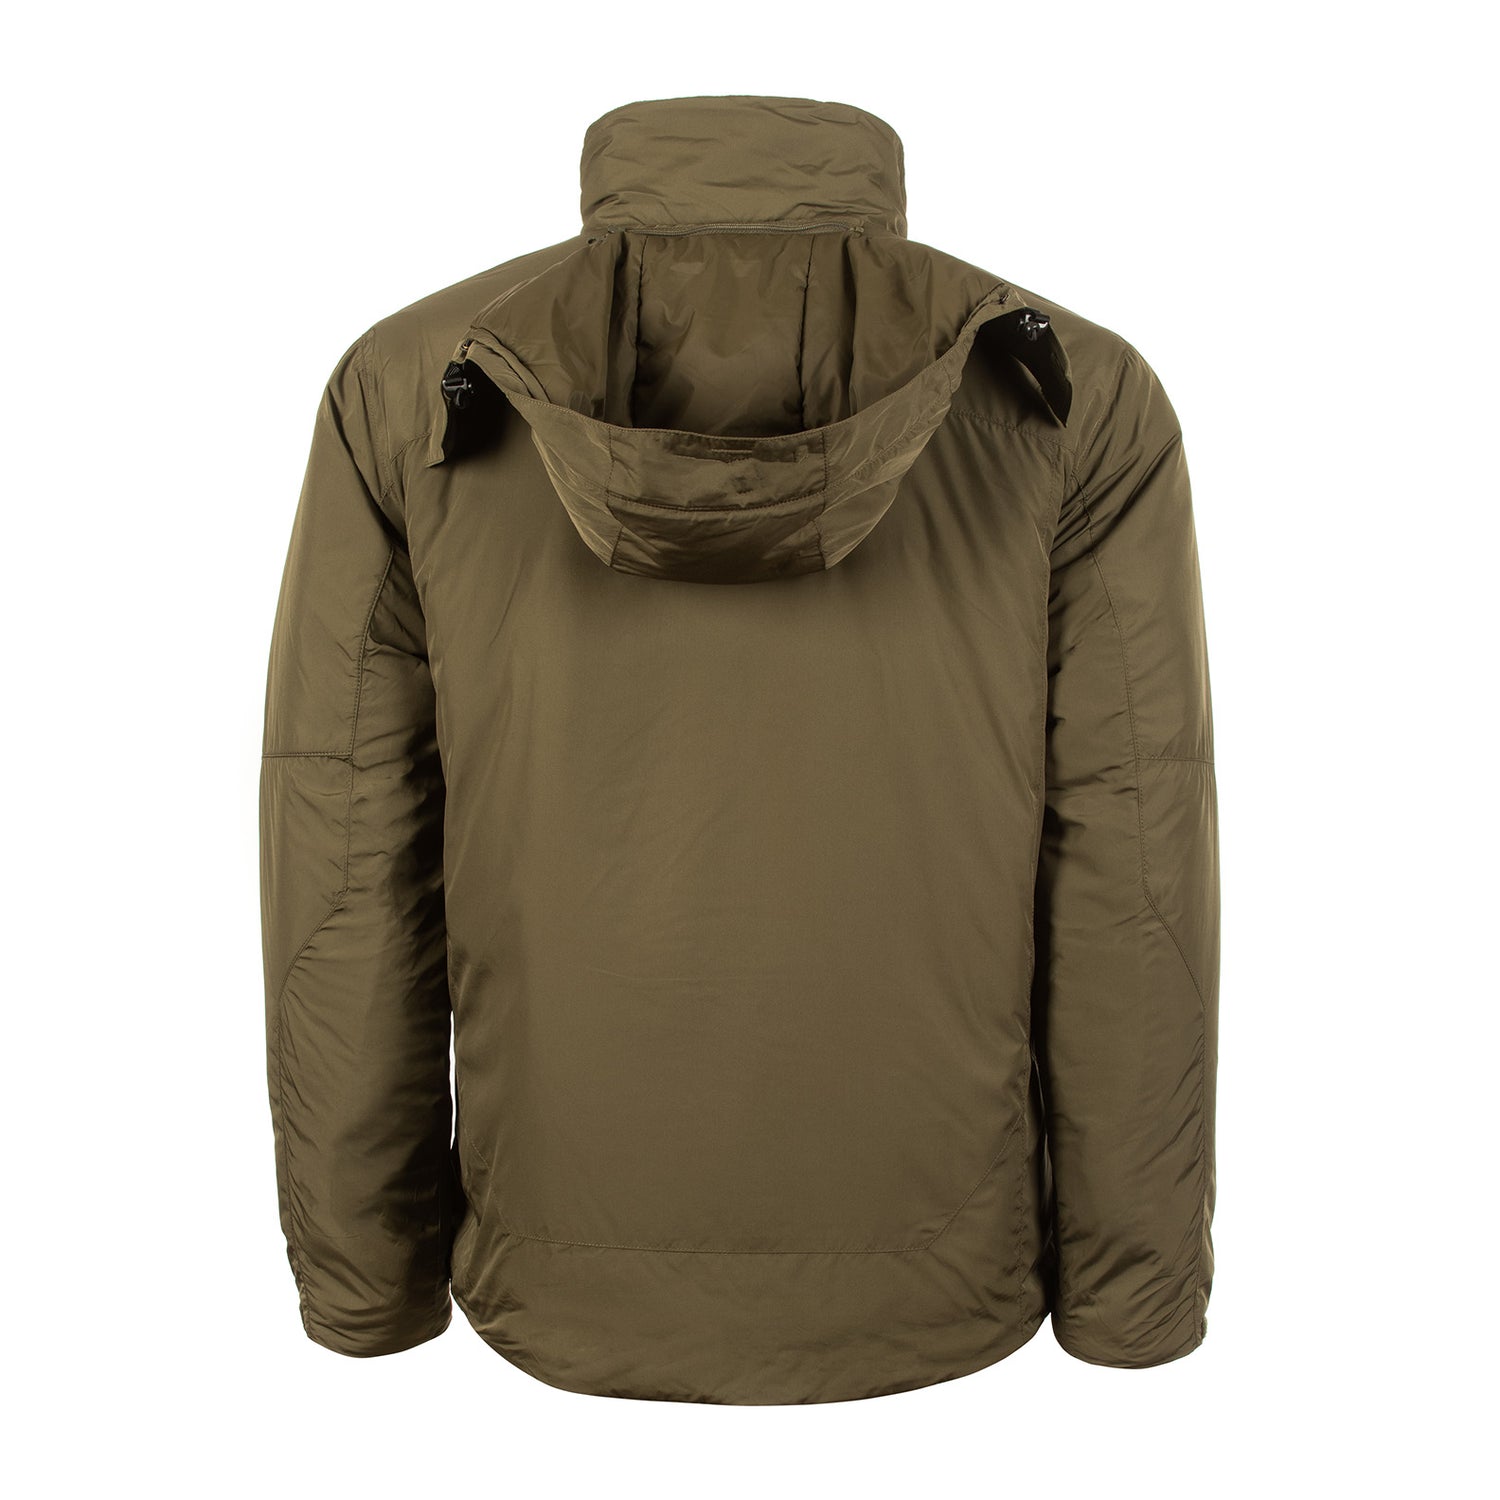 Snugpak Spearhead Technical Midweight Insulated Jacket